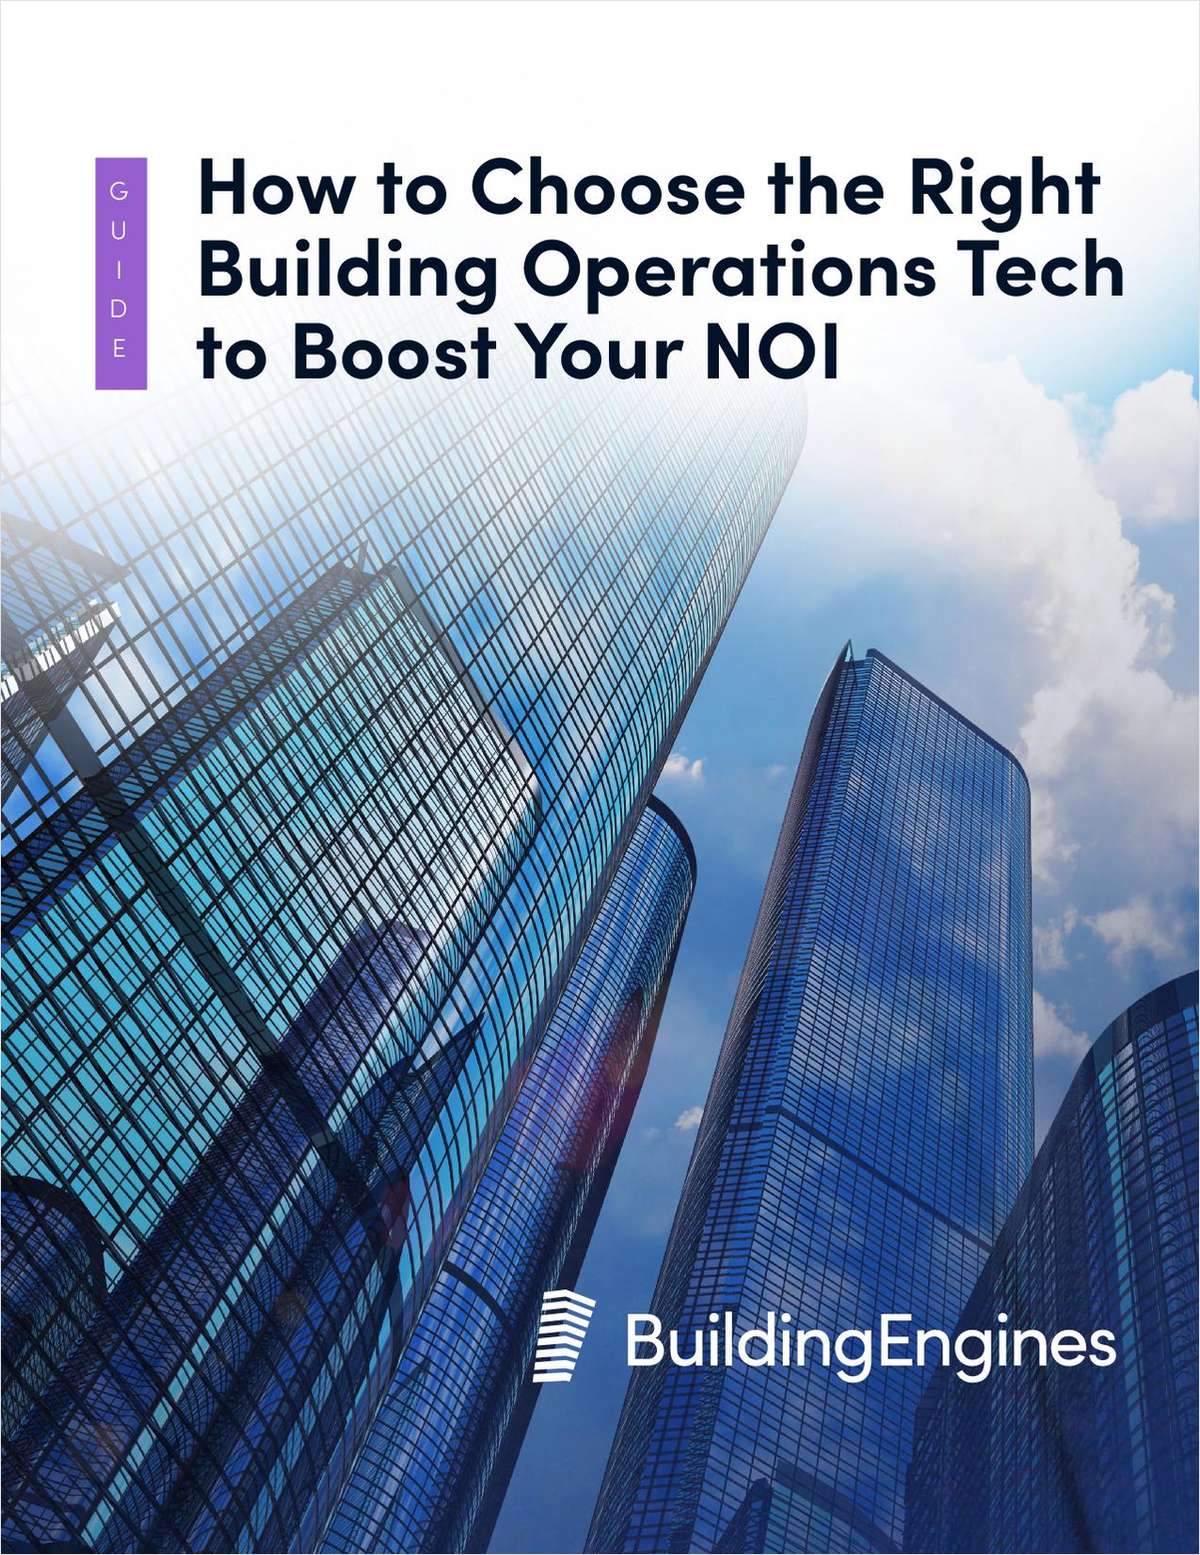 How to Choose the Right Building Operations Tech to Boost Your NOI link